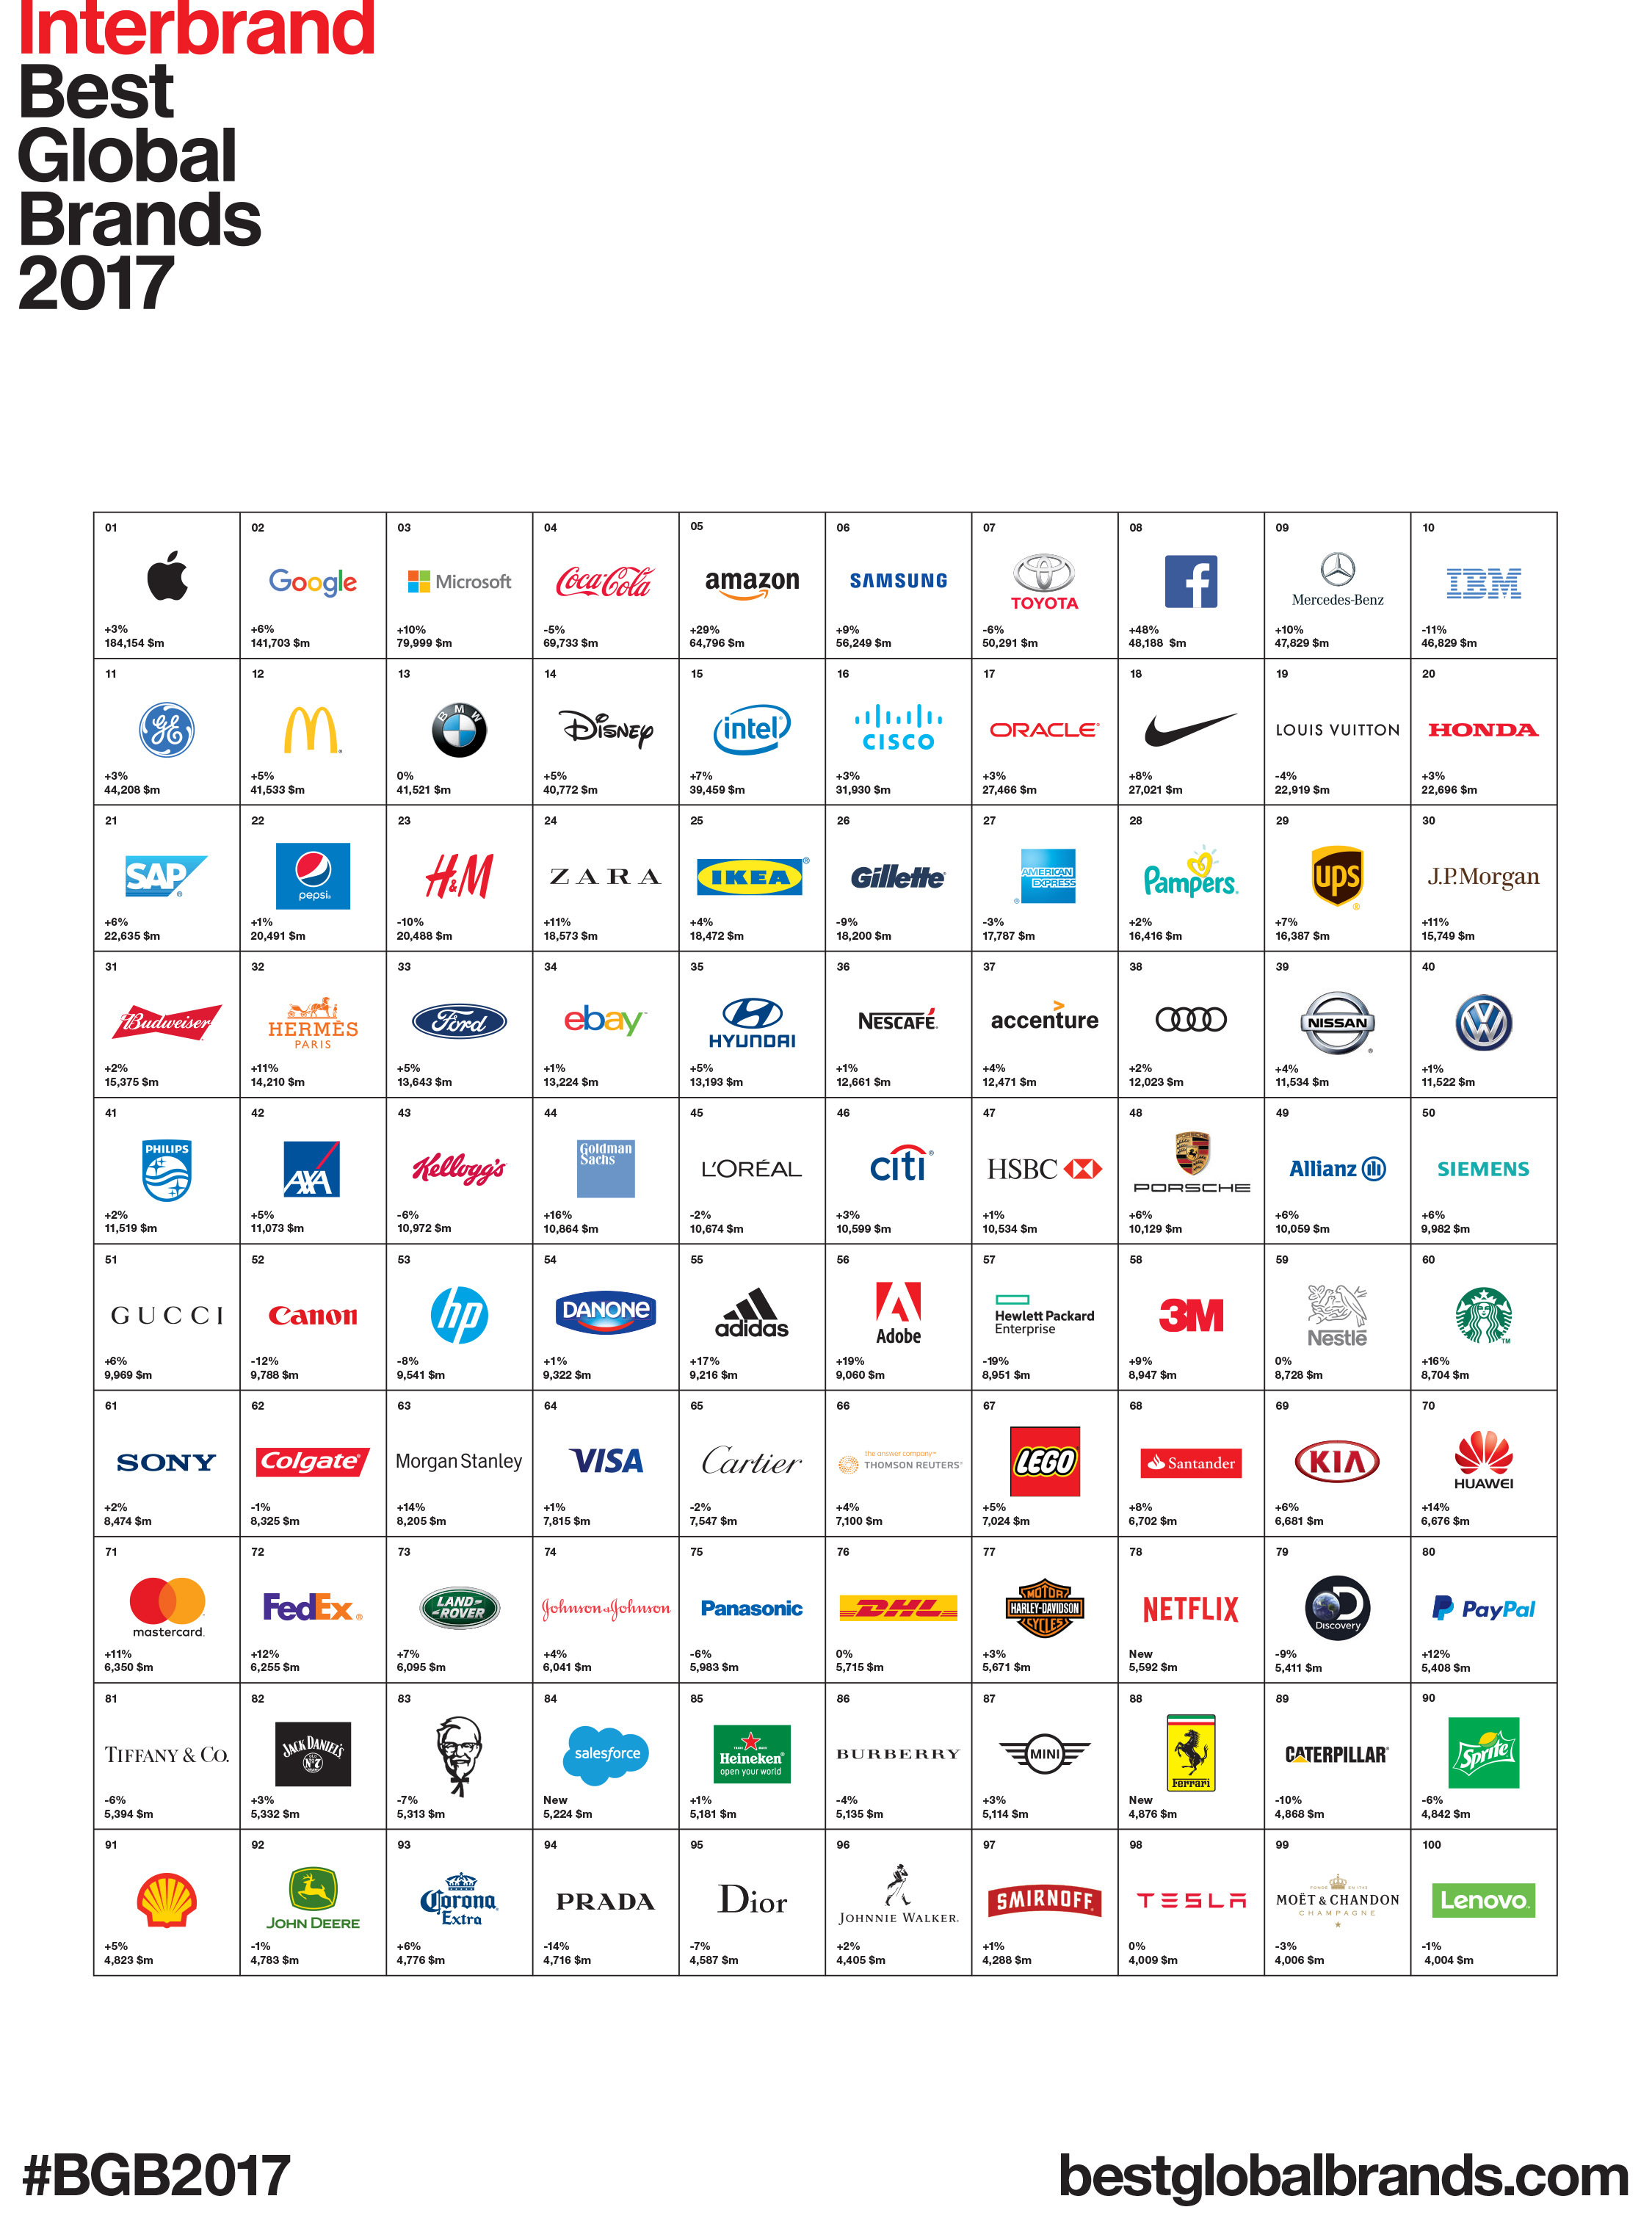 Interbrand Releases 2017 Best Global Brands Report: Apple and